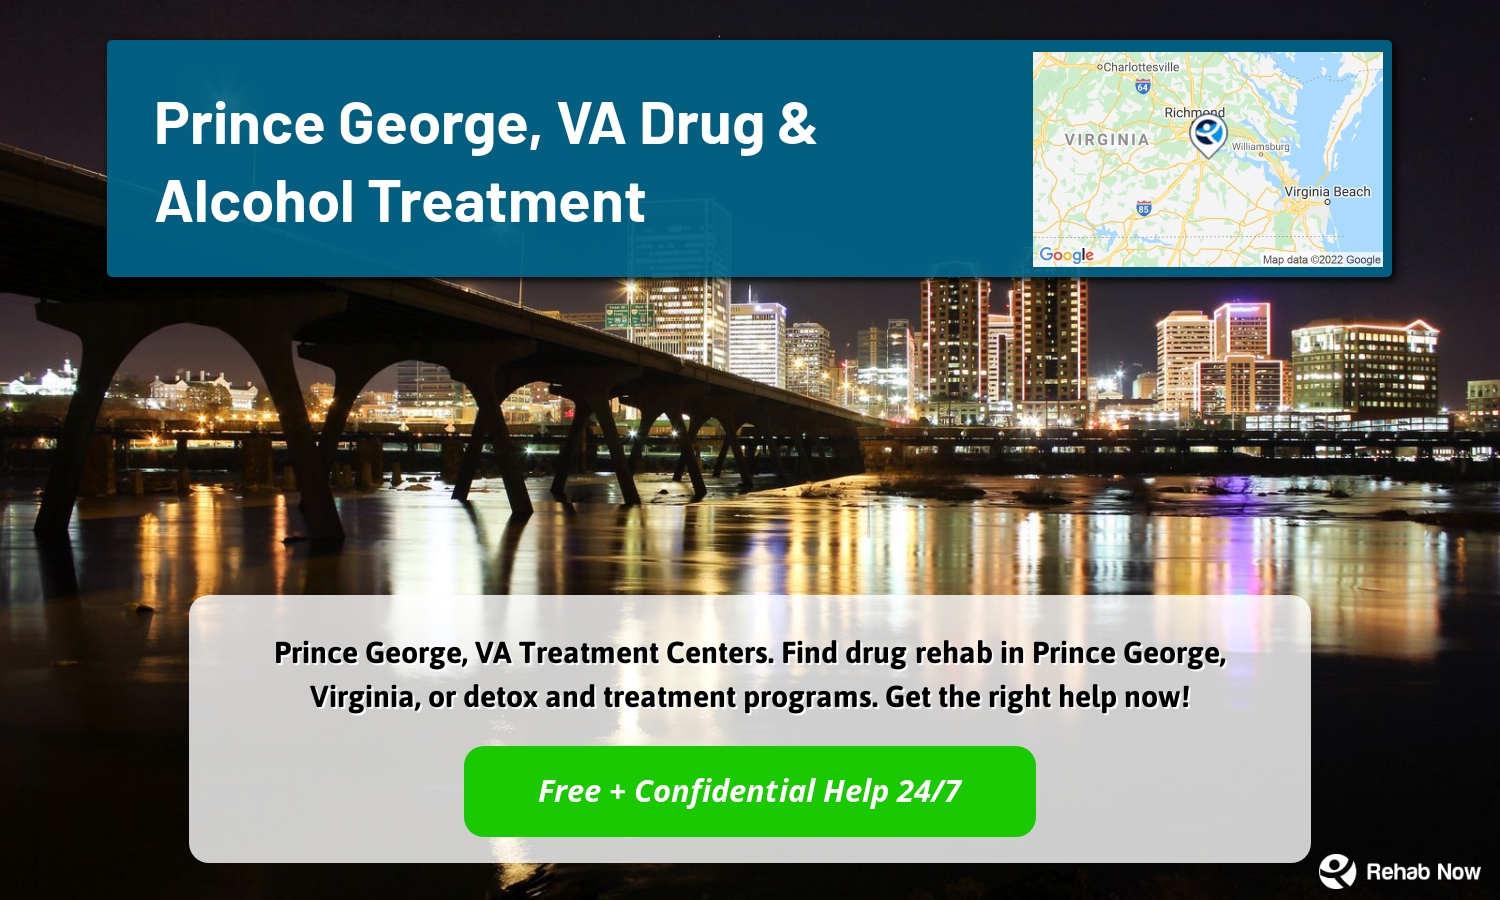 Prince George, VA Treatment Centers. Find drug rehab in Prince George, Virginia, or detox and treatment programs. Get the right help now!